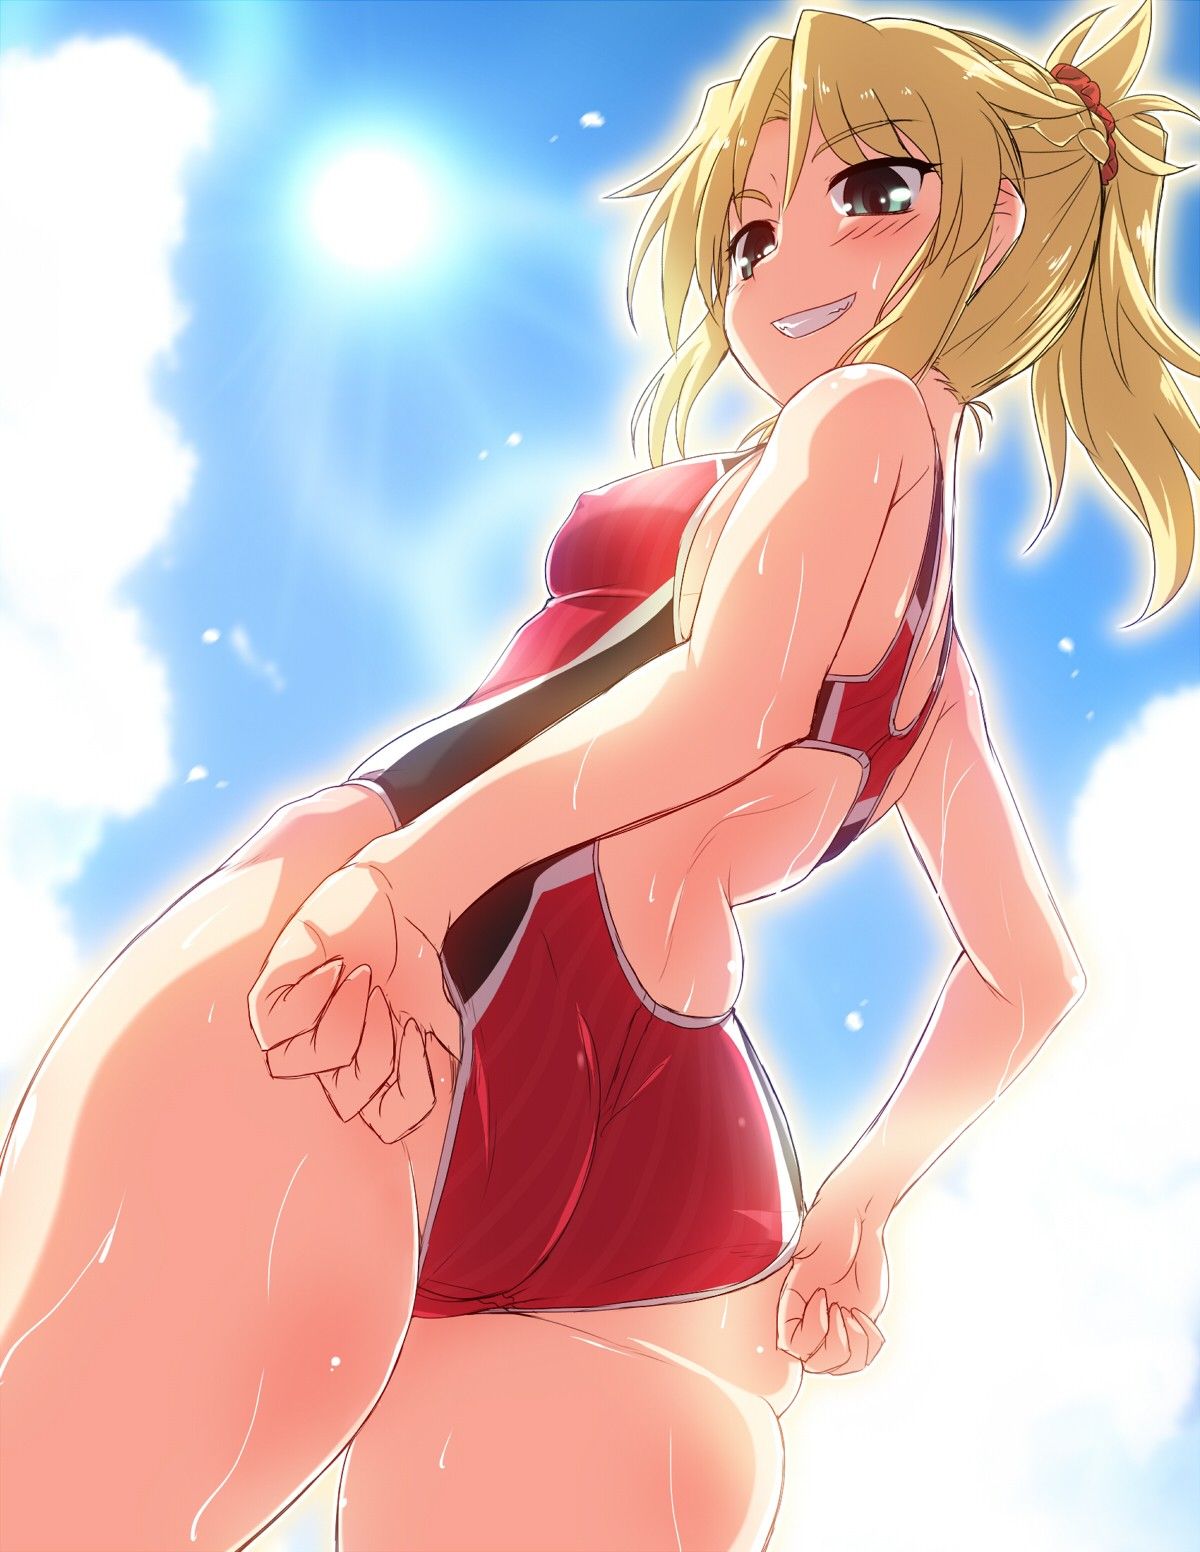 Swimming swimsuits are pitchy, but that's great, isn't it? I don't like the side that wears it. 3